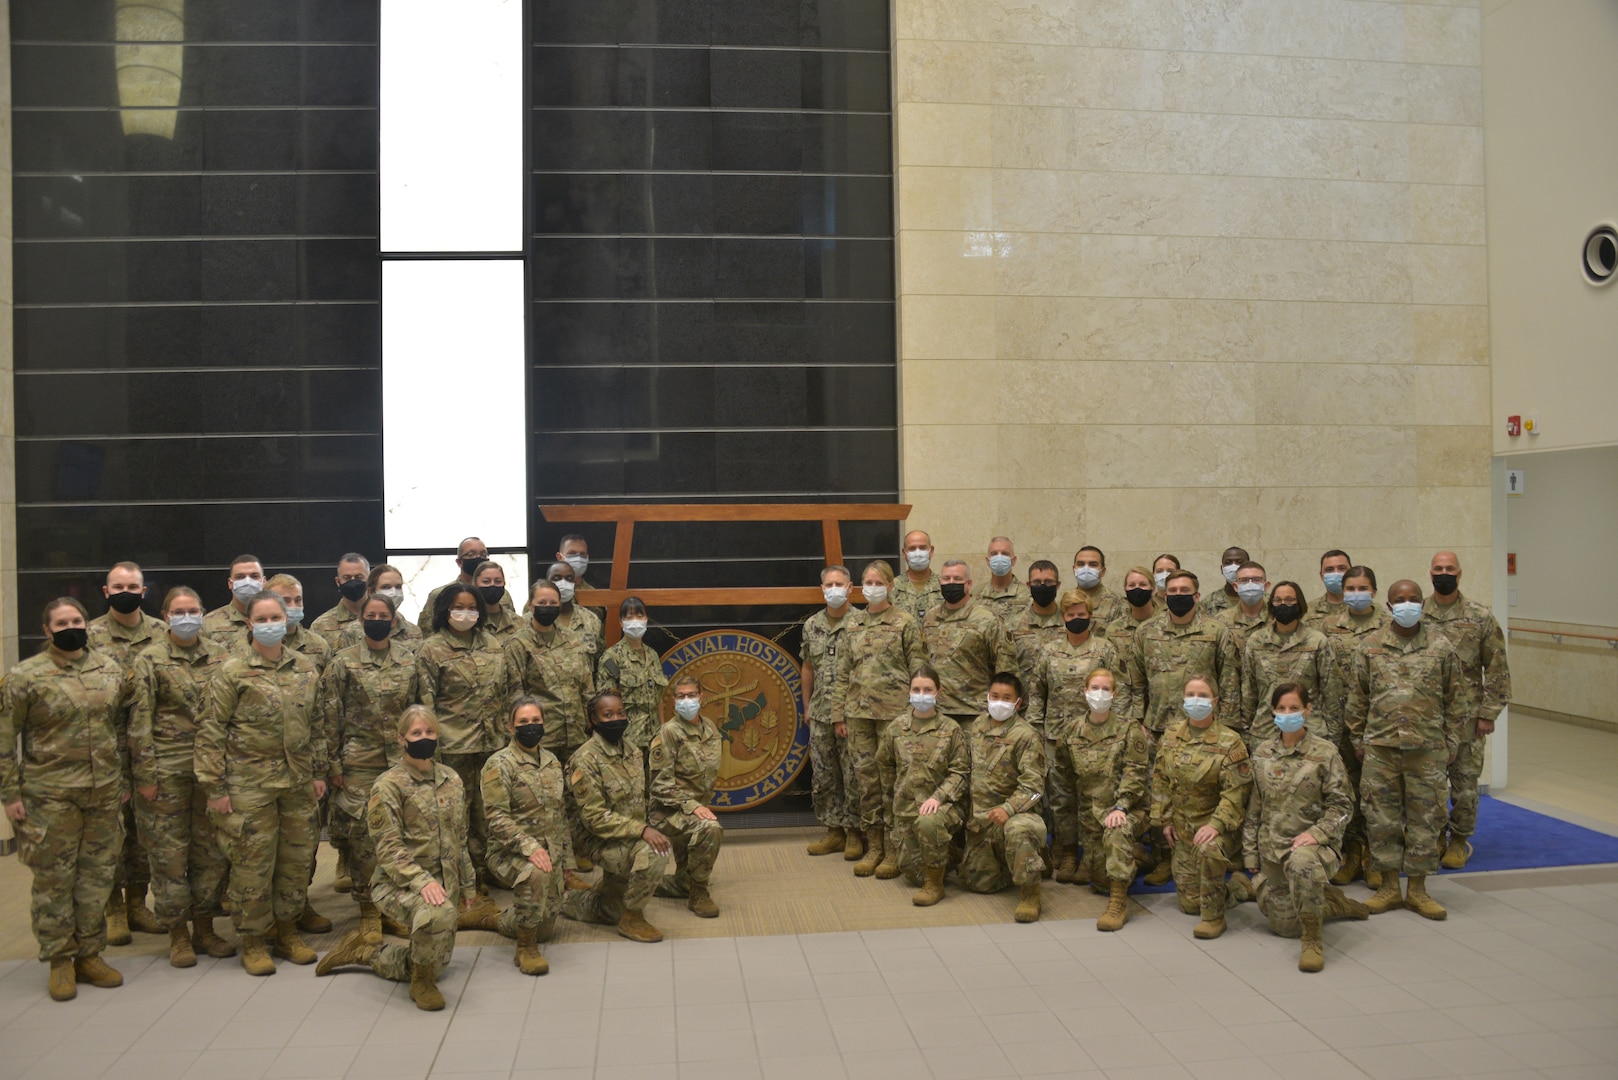 Members of the 155th Medical Group, Nebraska Air National Guard, and the 139th Medical Group, Missouri Air National Guard, traveled to Okinawa for annual training Aug. 2-11, 2022.